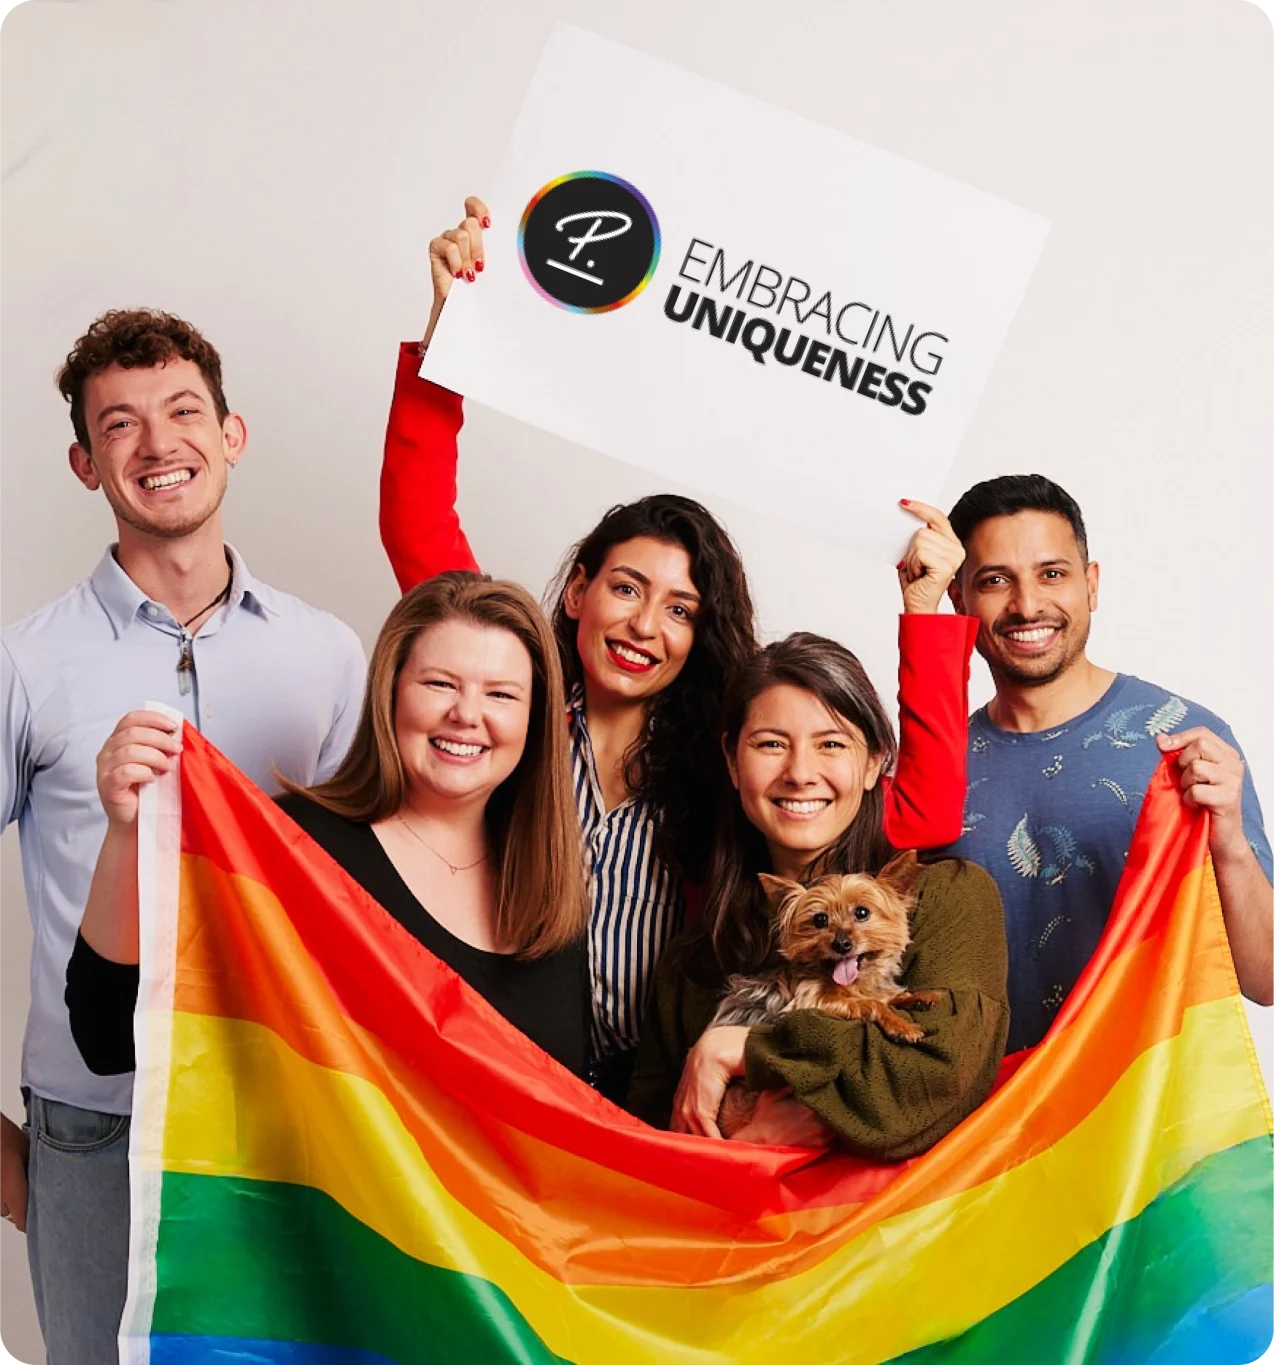 DEI pride group with flag and sign